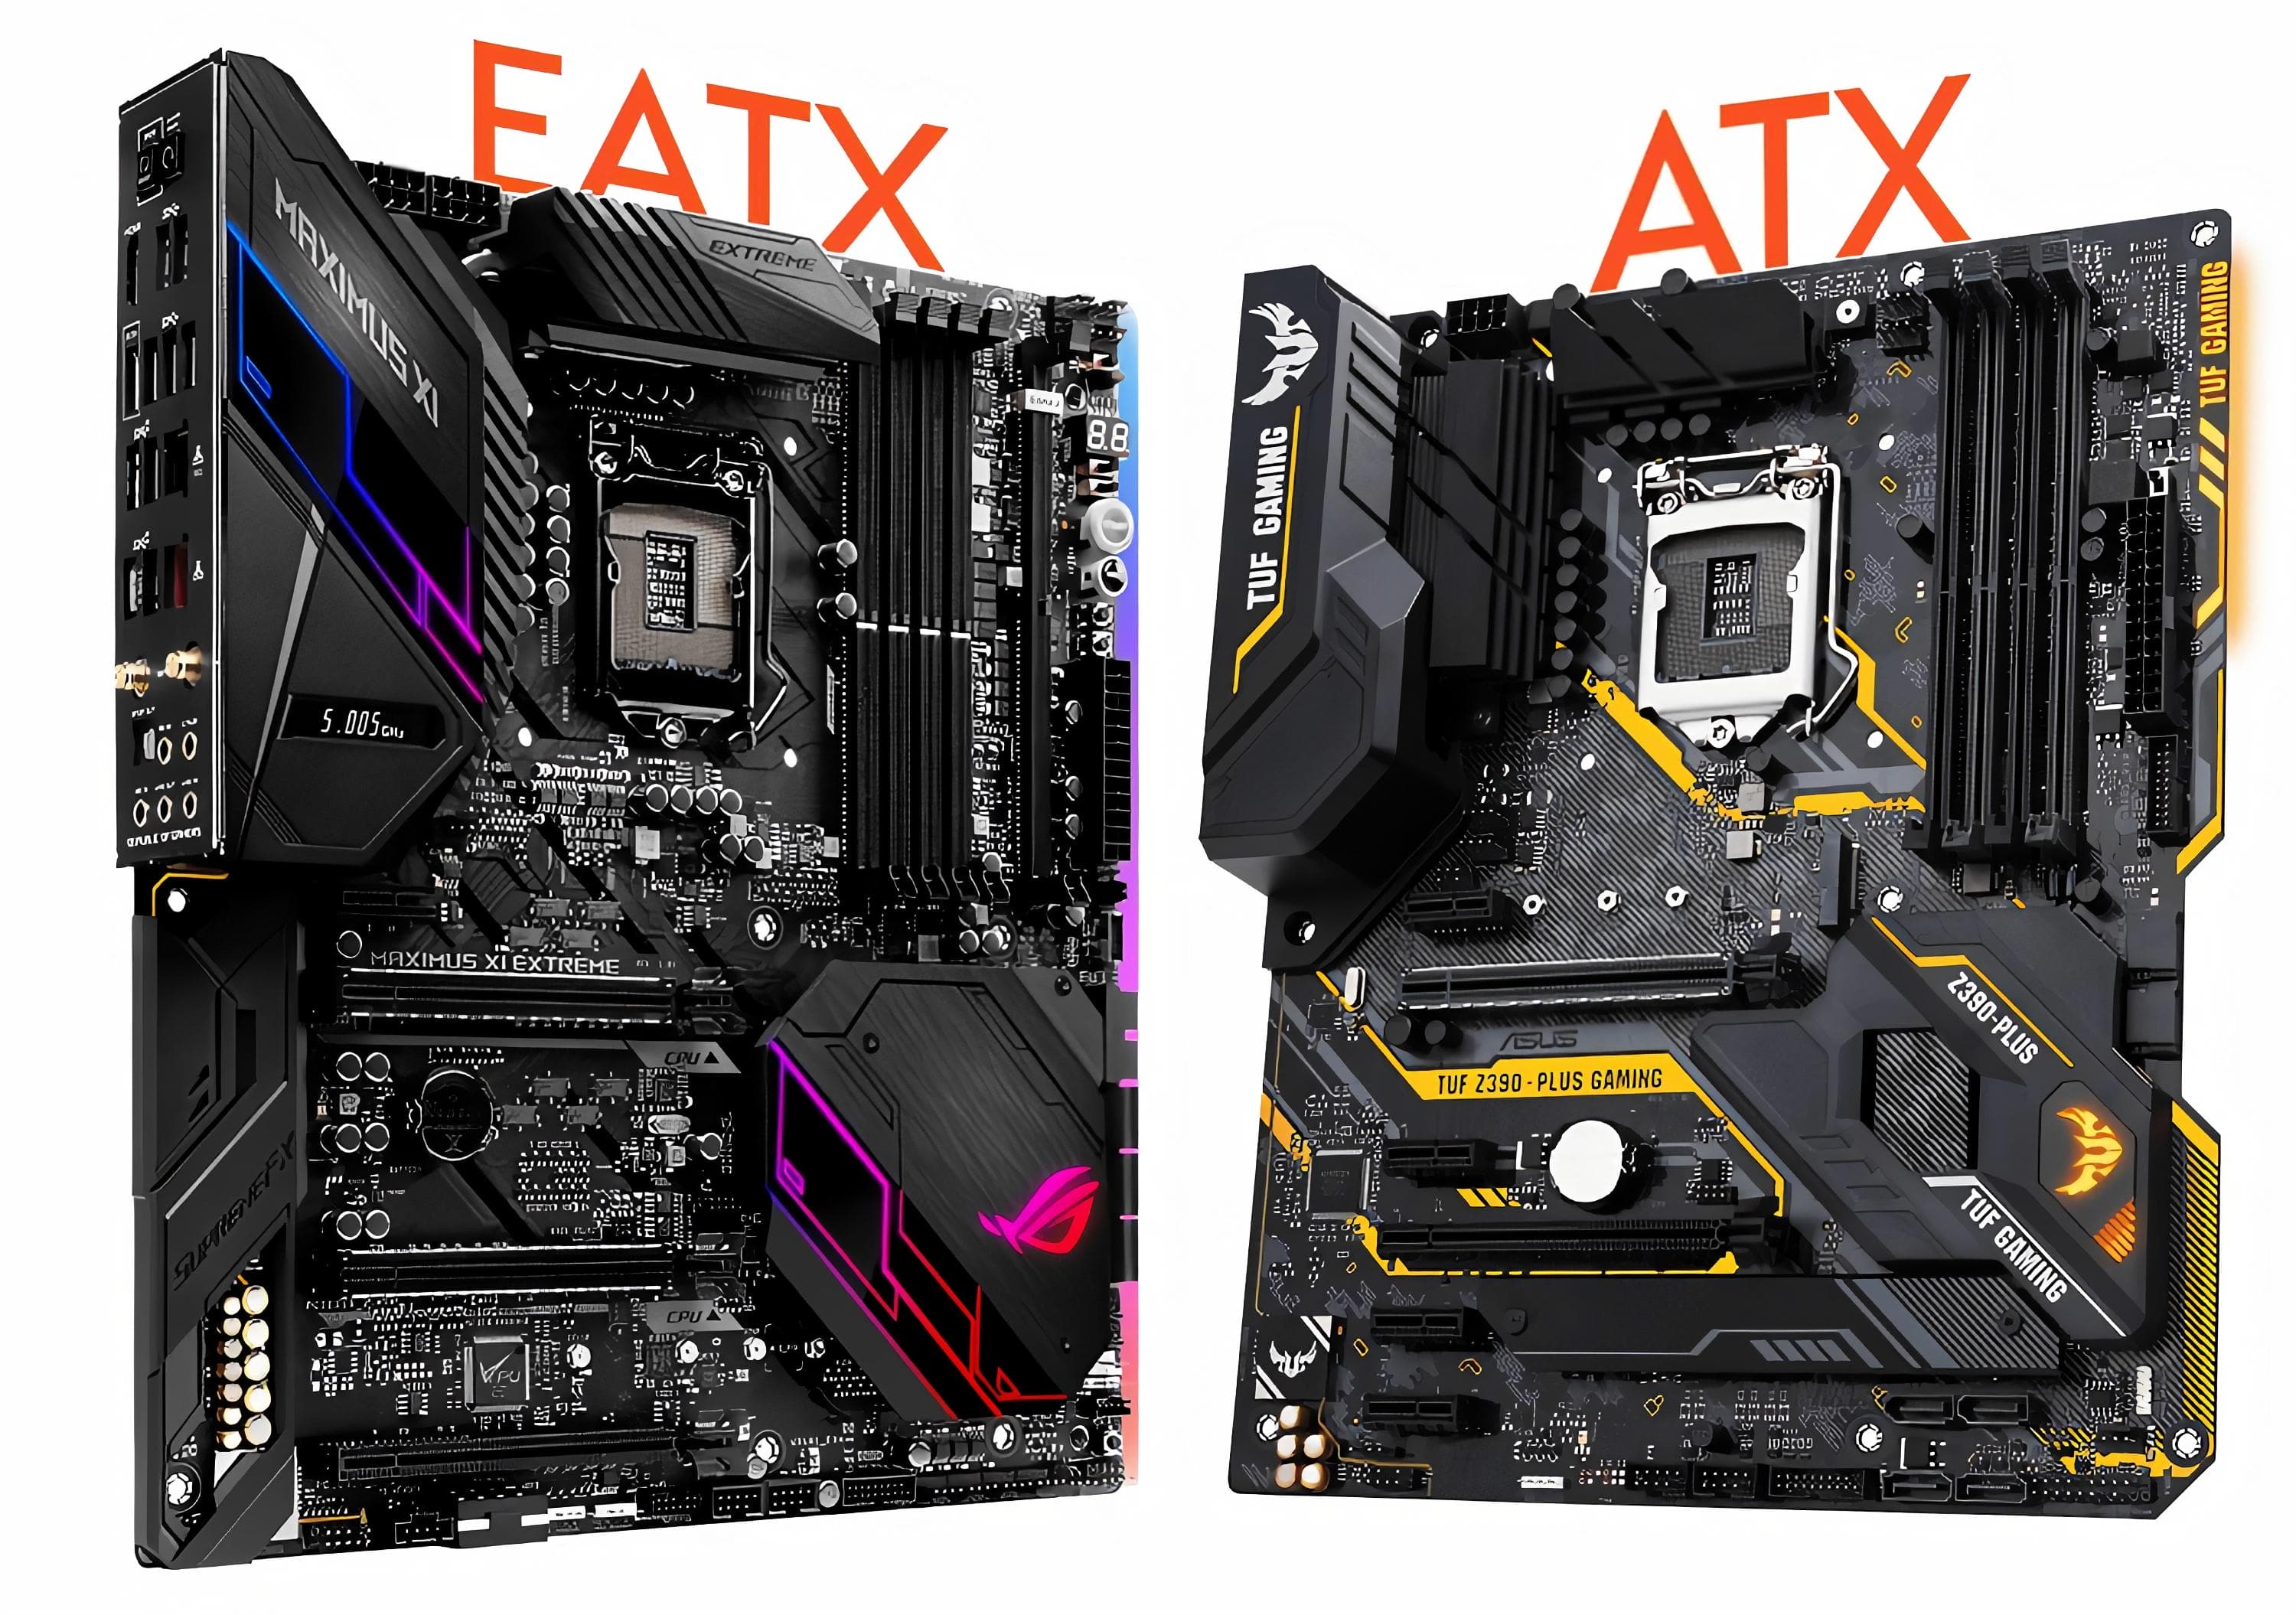 Eatx Vs Atx What Is The Difference